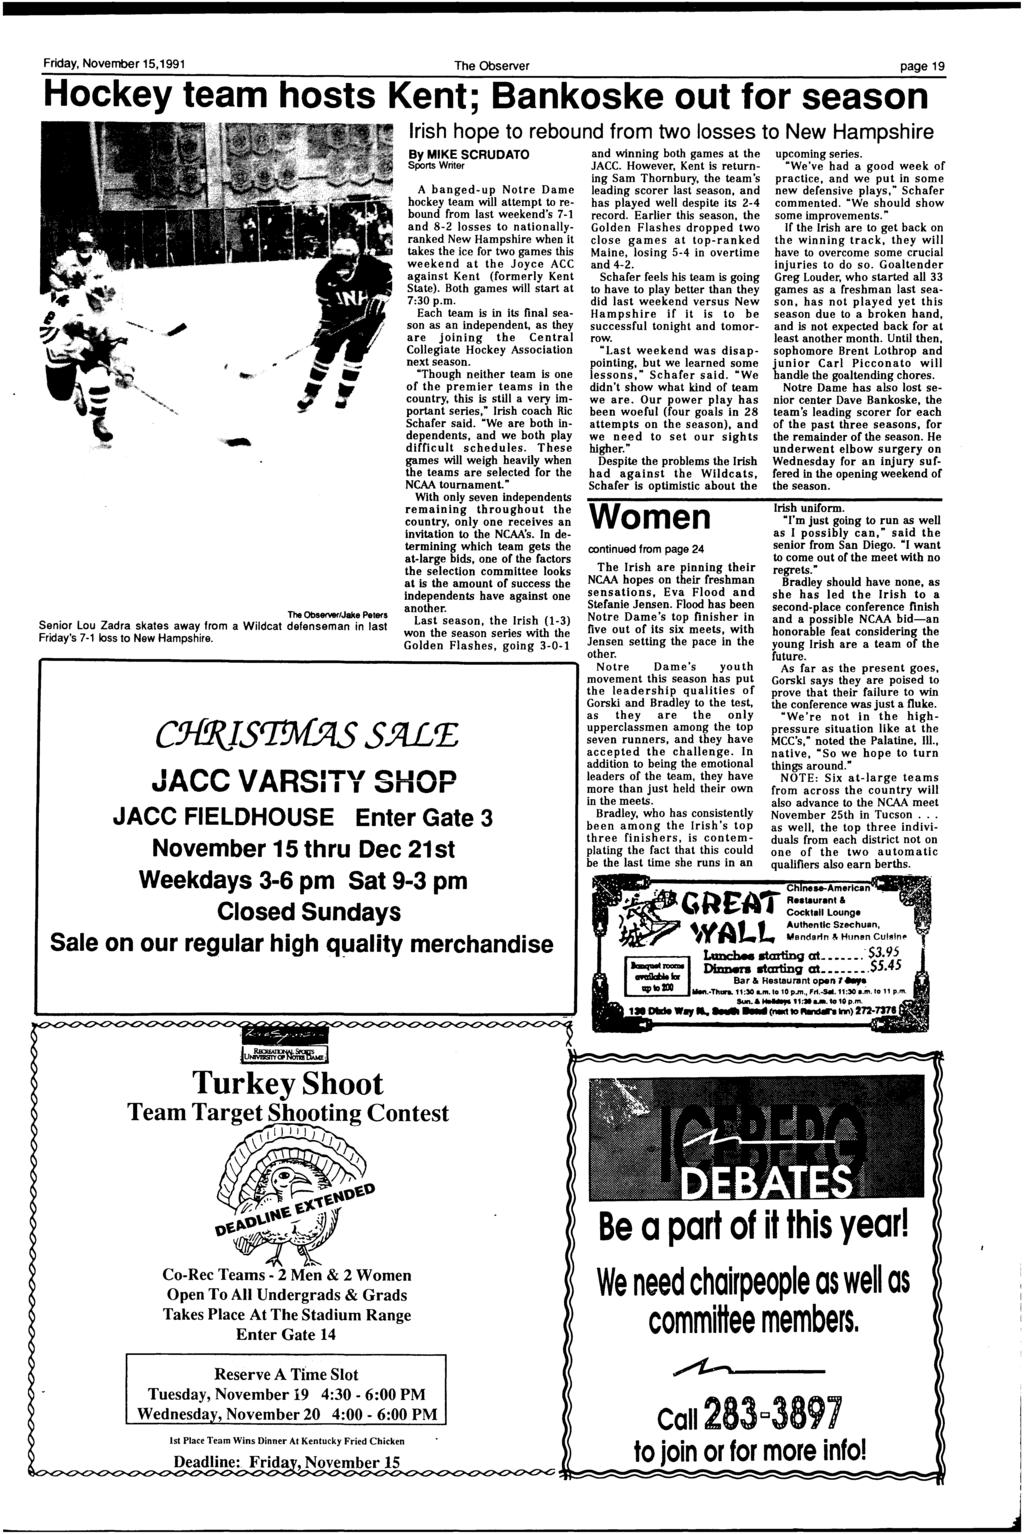 Friday, November 15,1991 The Observer page 19 Hockey team hosts Kent; Bankoske out for season The Observer/Jake Peters Senior Lou Zadra skates away from a Wildcat defenseman in last Friday's 7-1 loss